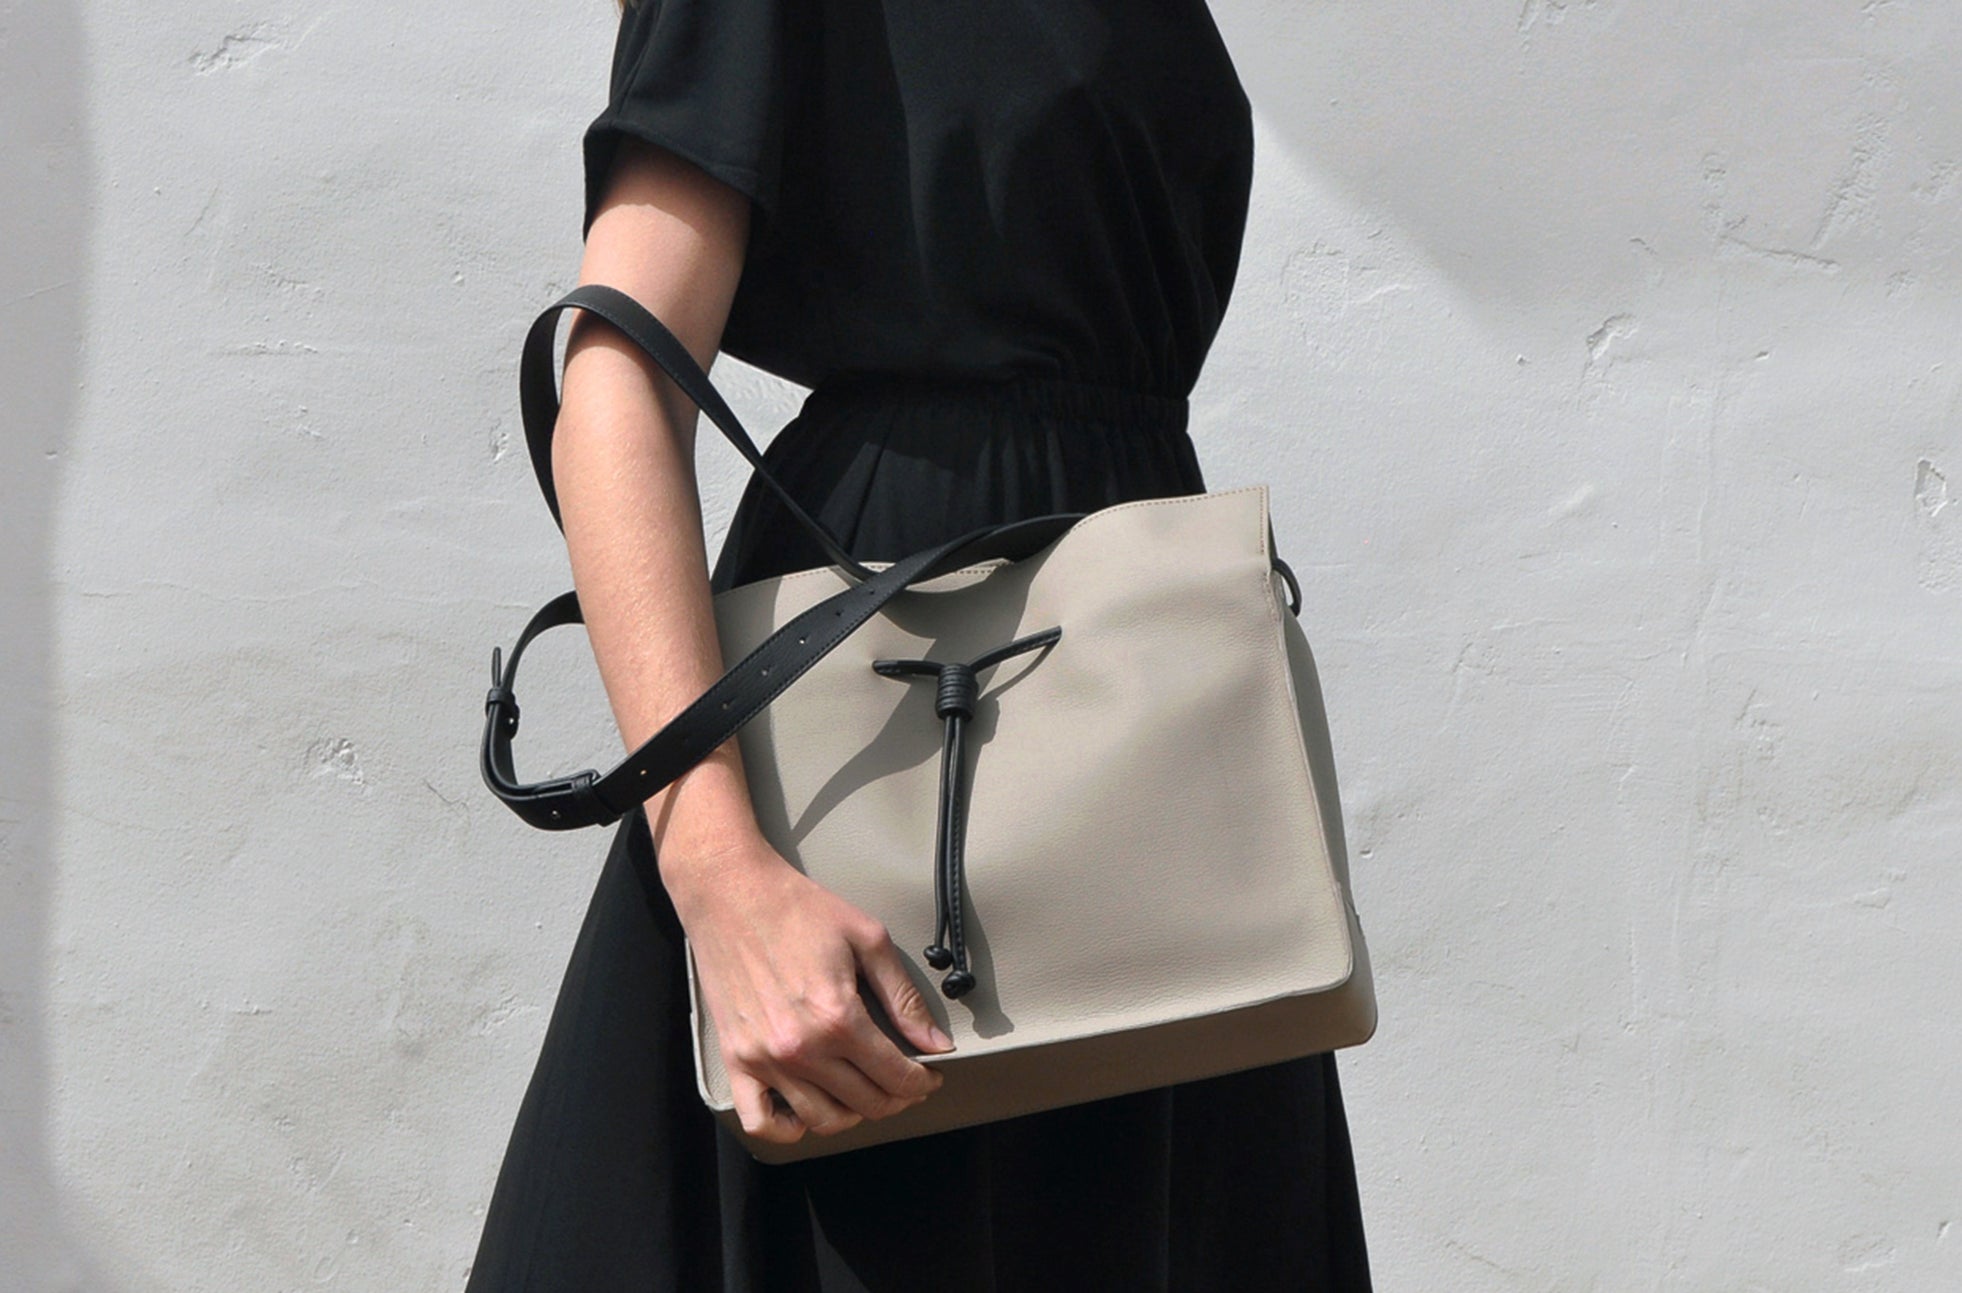 The Medium Shopper in Technik-Leather in Stone and Black image 2